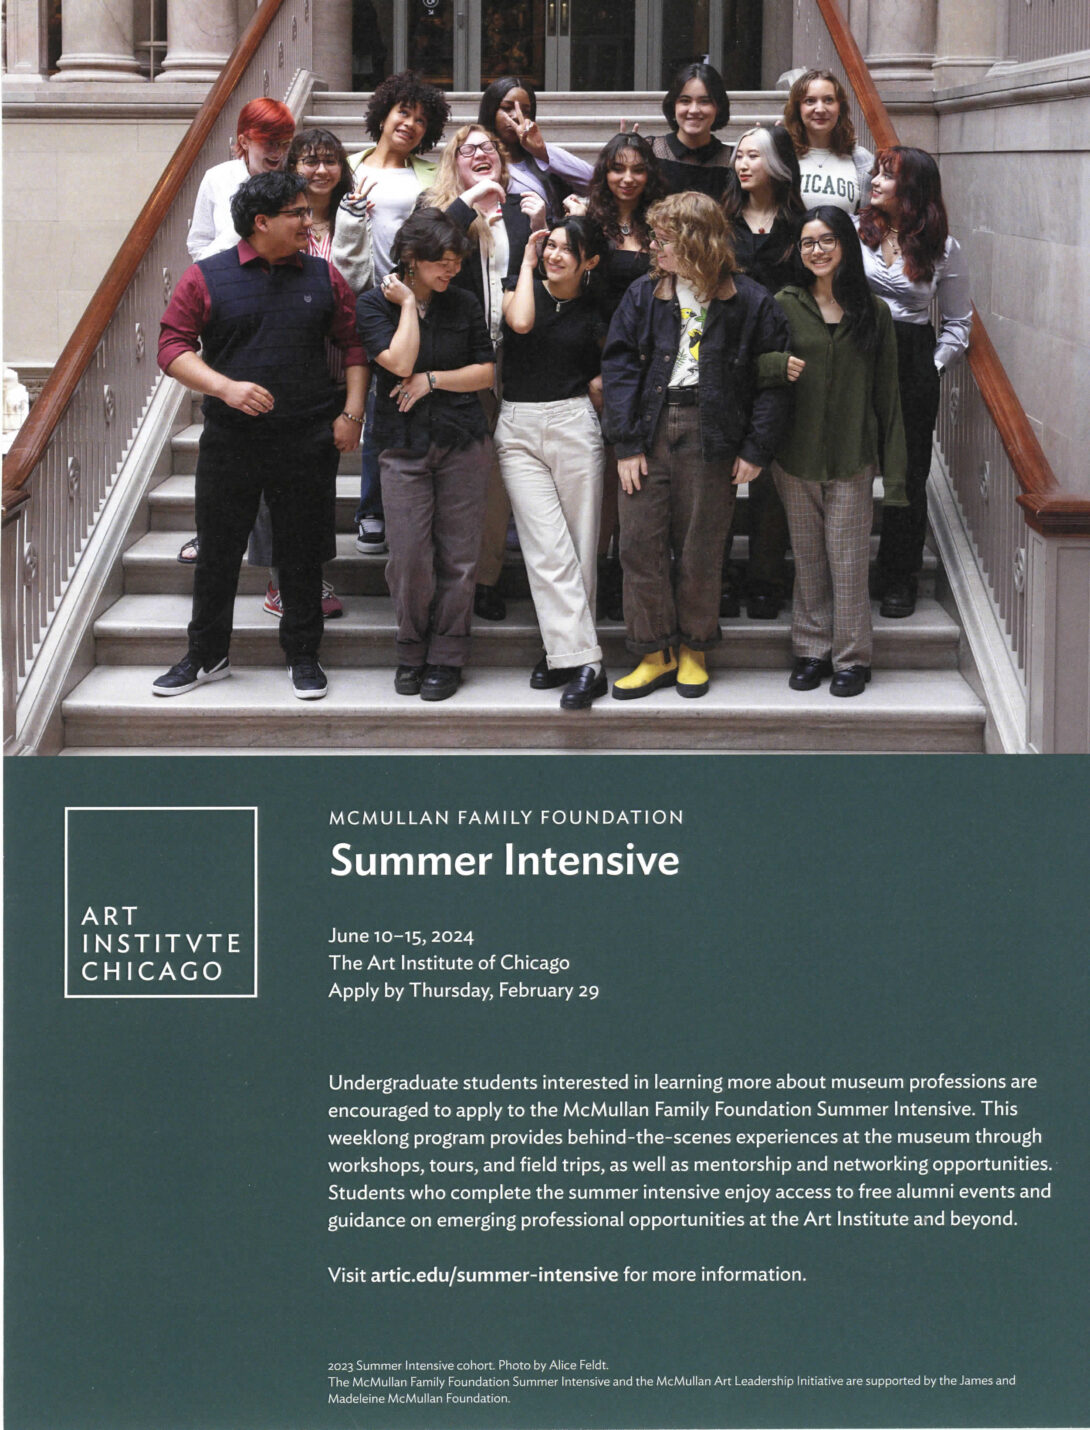 The upper half of the flyer features a photograph of the McMullan Family Foundation Summer Intensive participants of the summer of 2023. The lower half of the flyer features a logo of the Art Institue of Chicago accompanied by text advertising the program over a dark slate gray background.